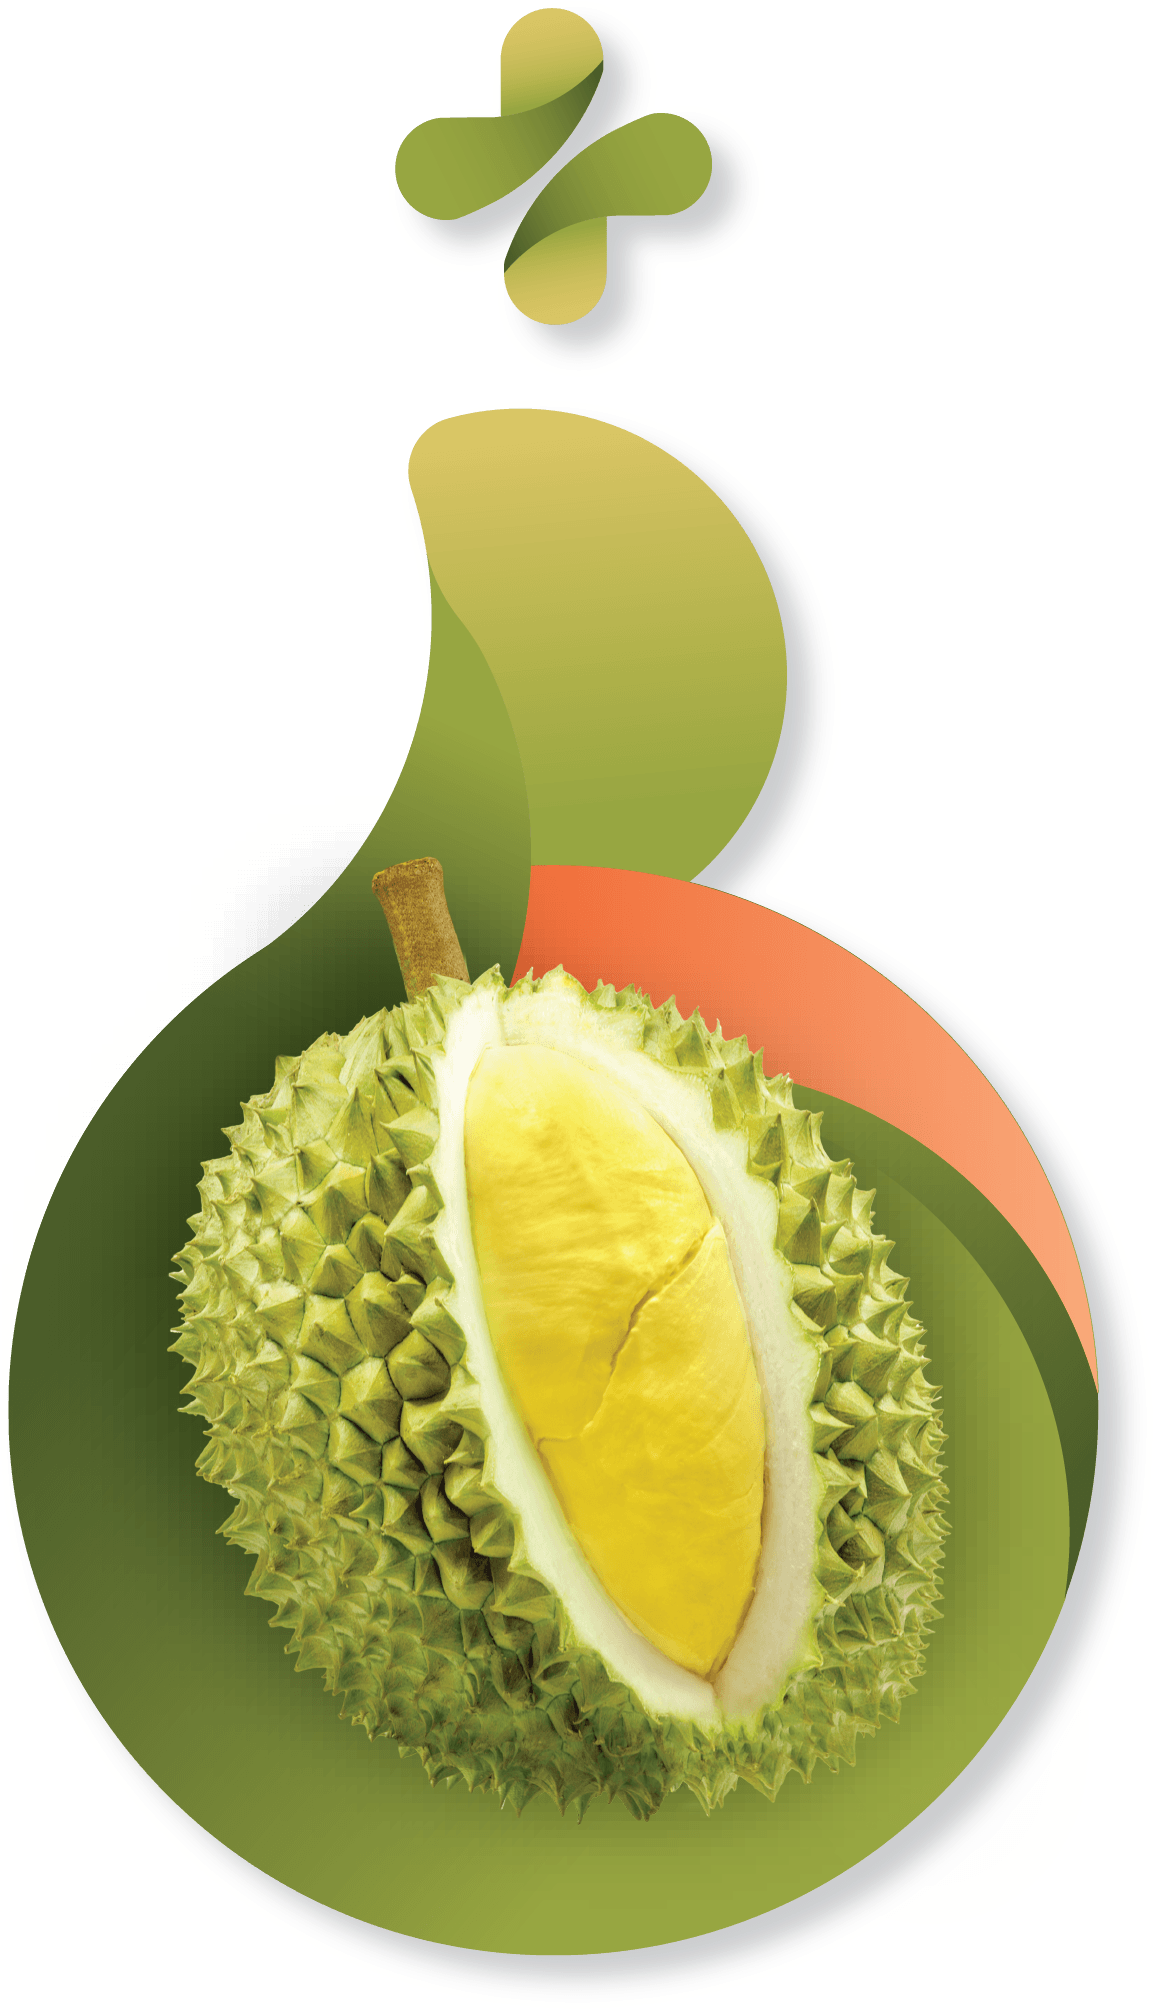 Stylized Durian Fruit Graphic